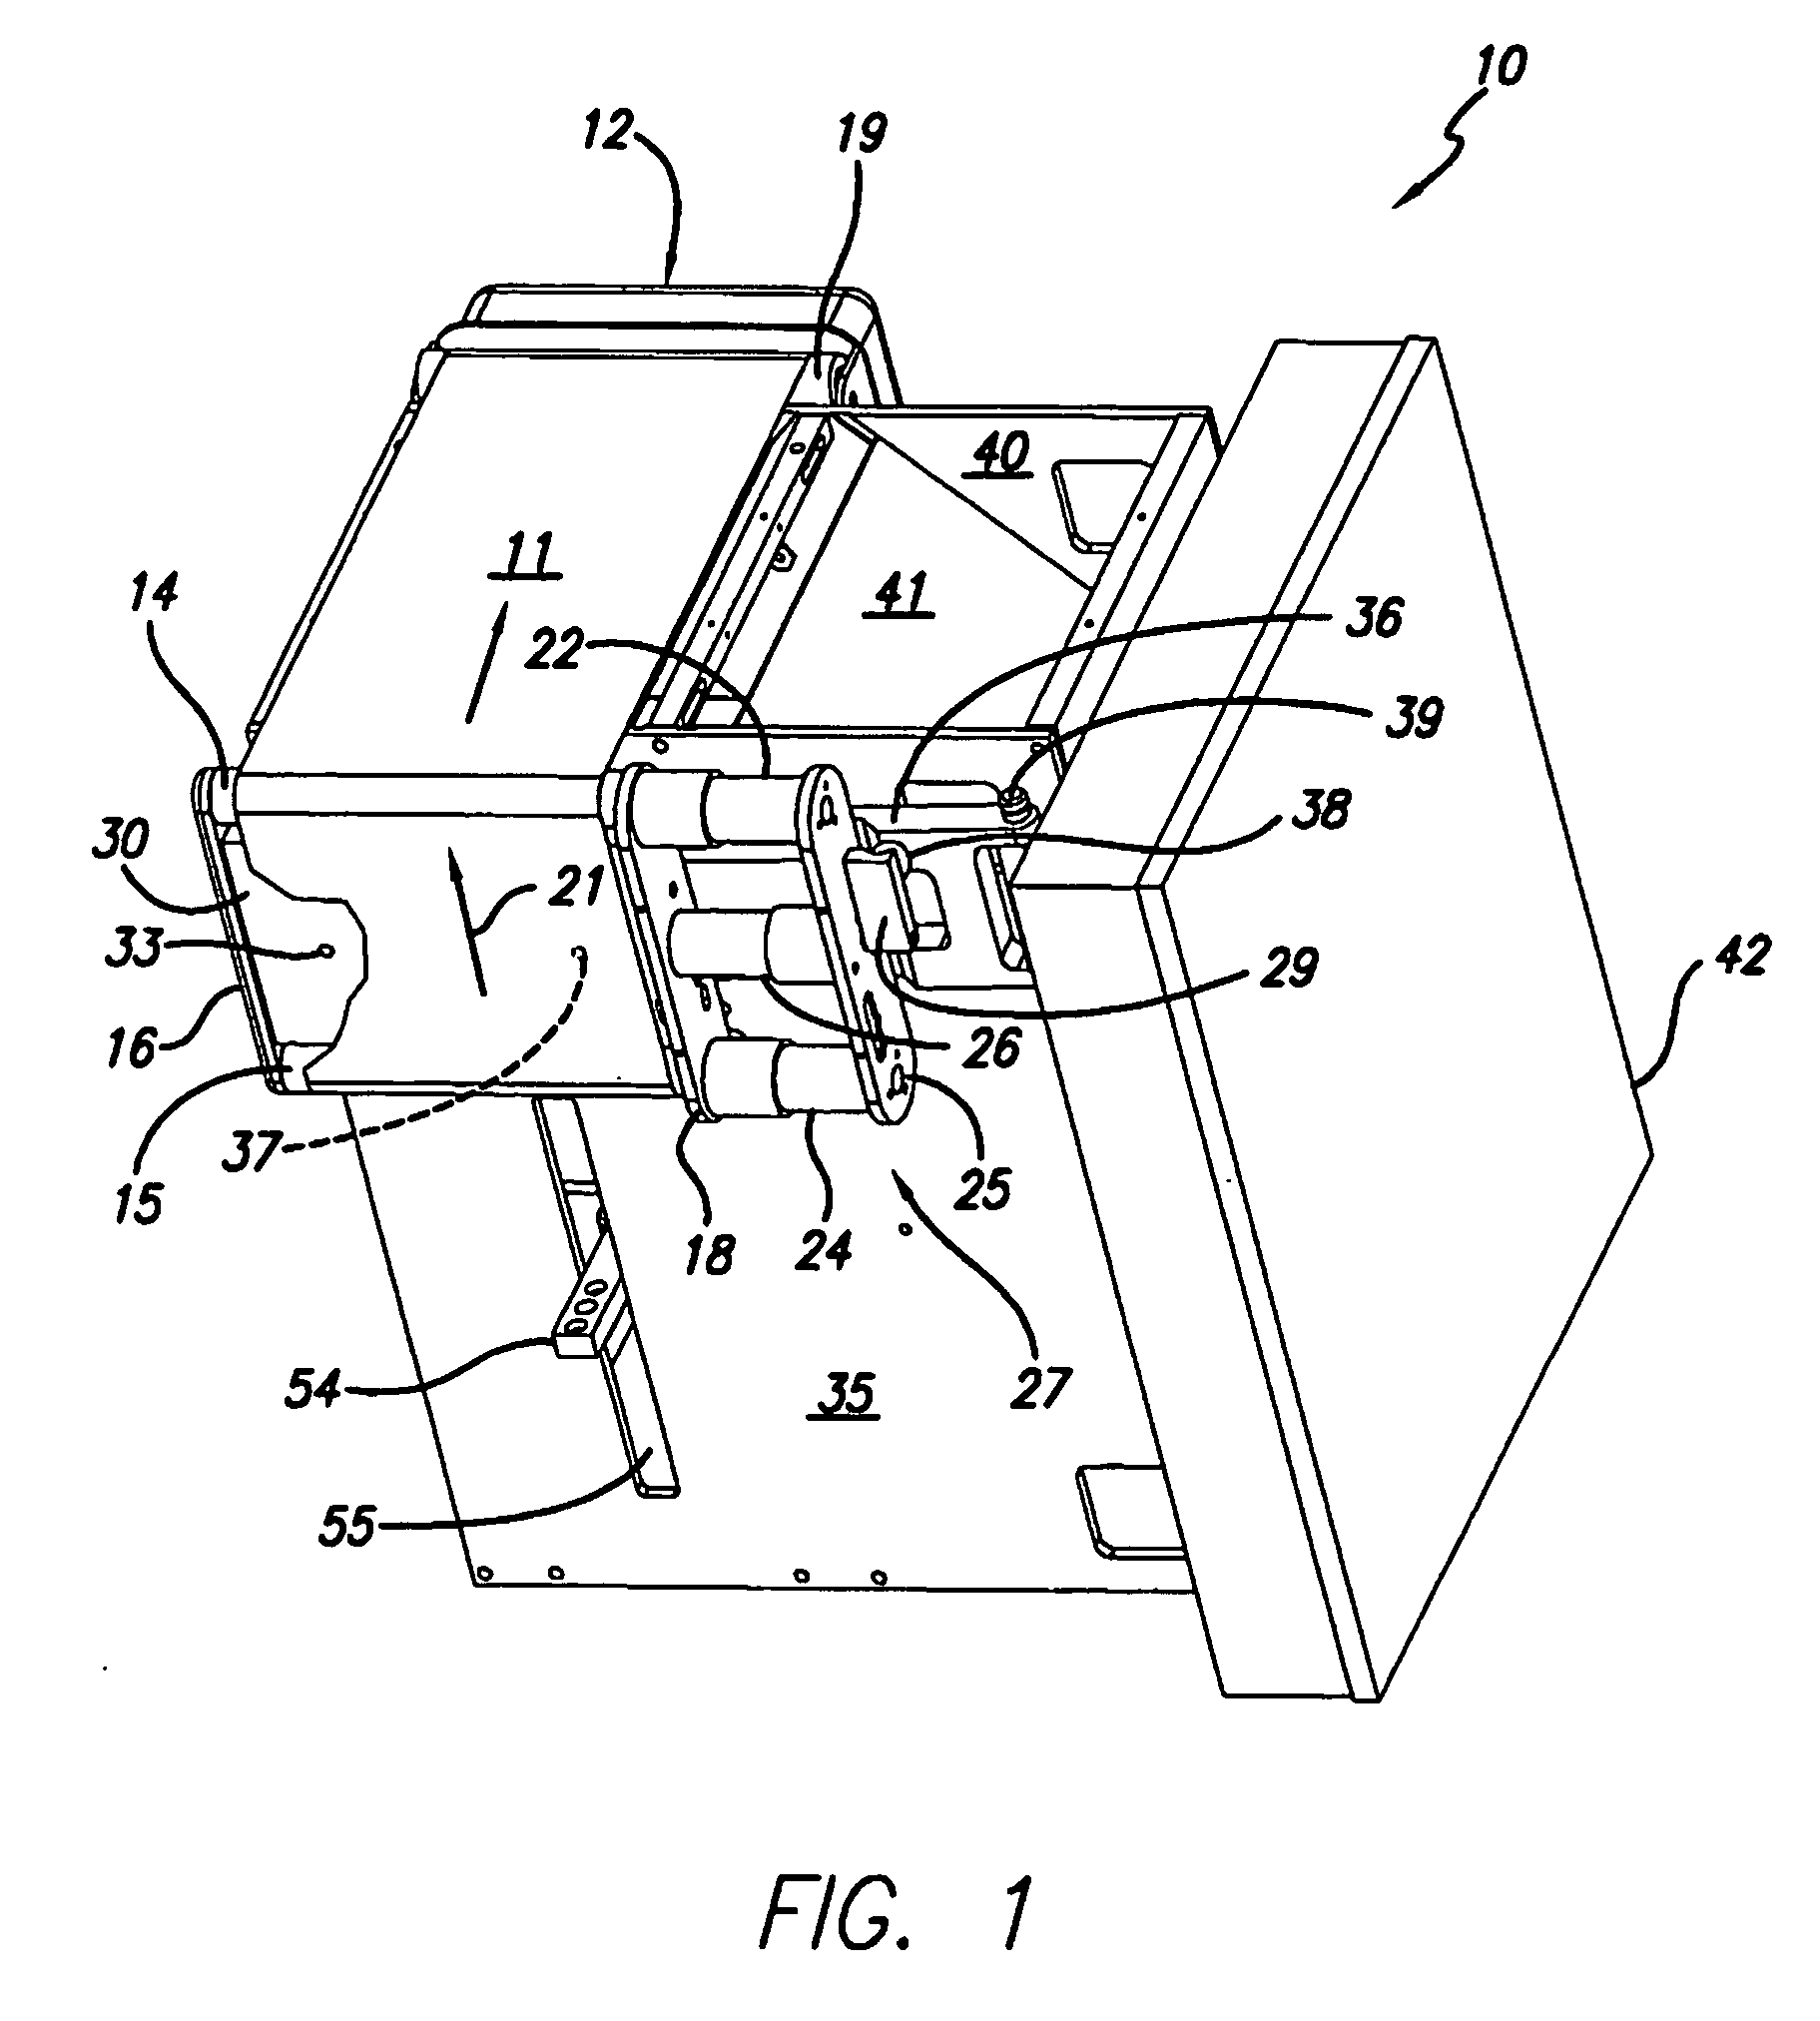 Material delivery tension and tracking system for use in solid imaging